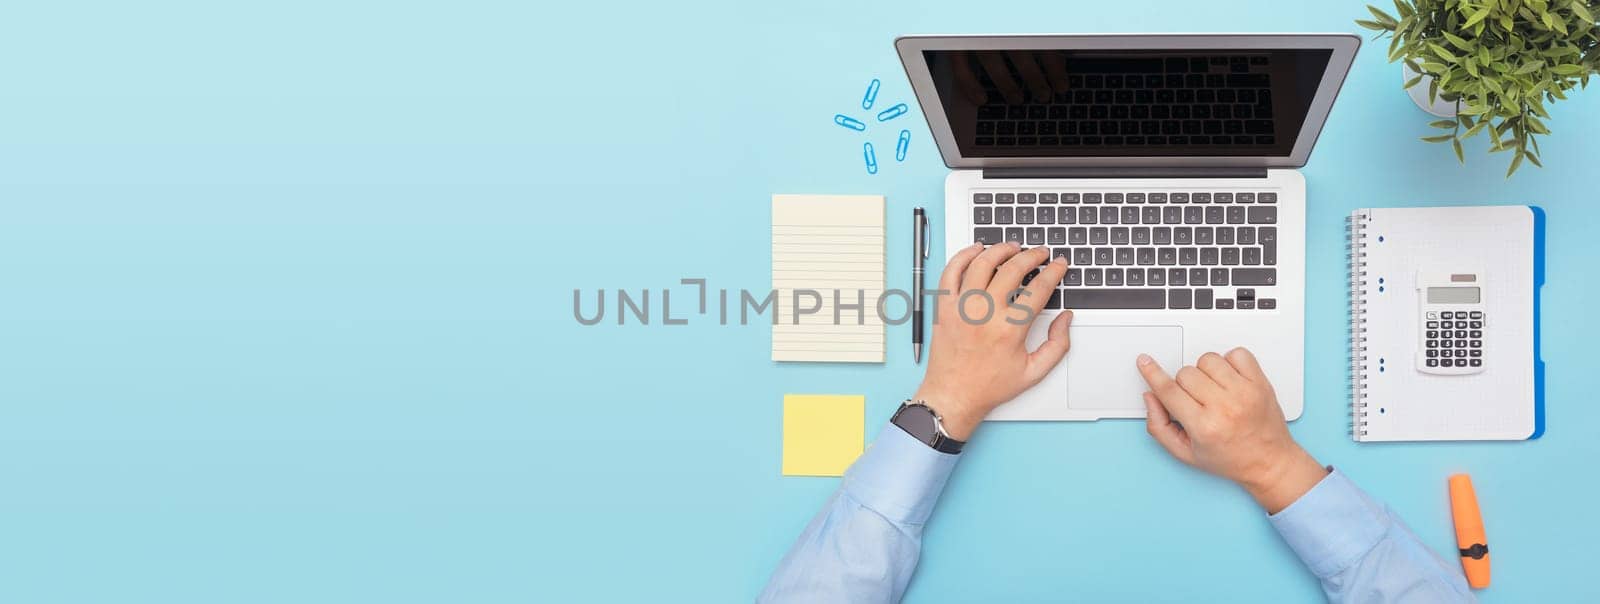 Workspace with laptop, office supplies. Man working on stylish table desk. Image with copy space on blue background